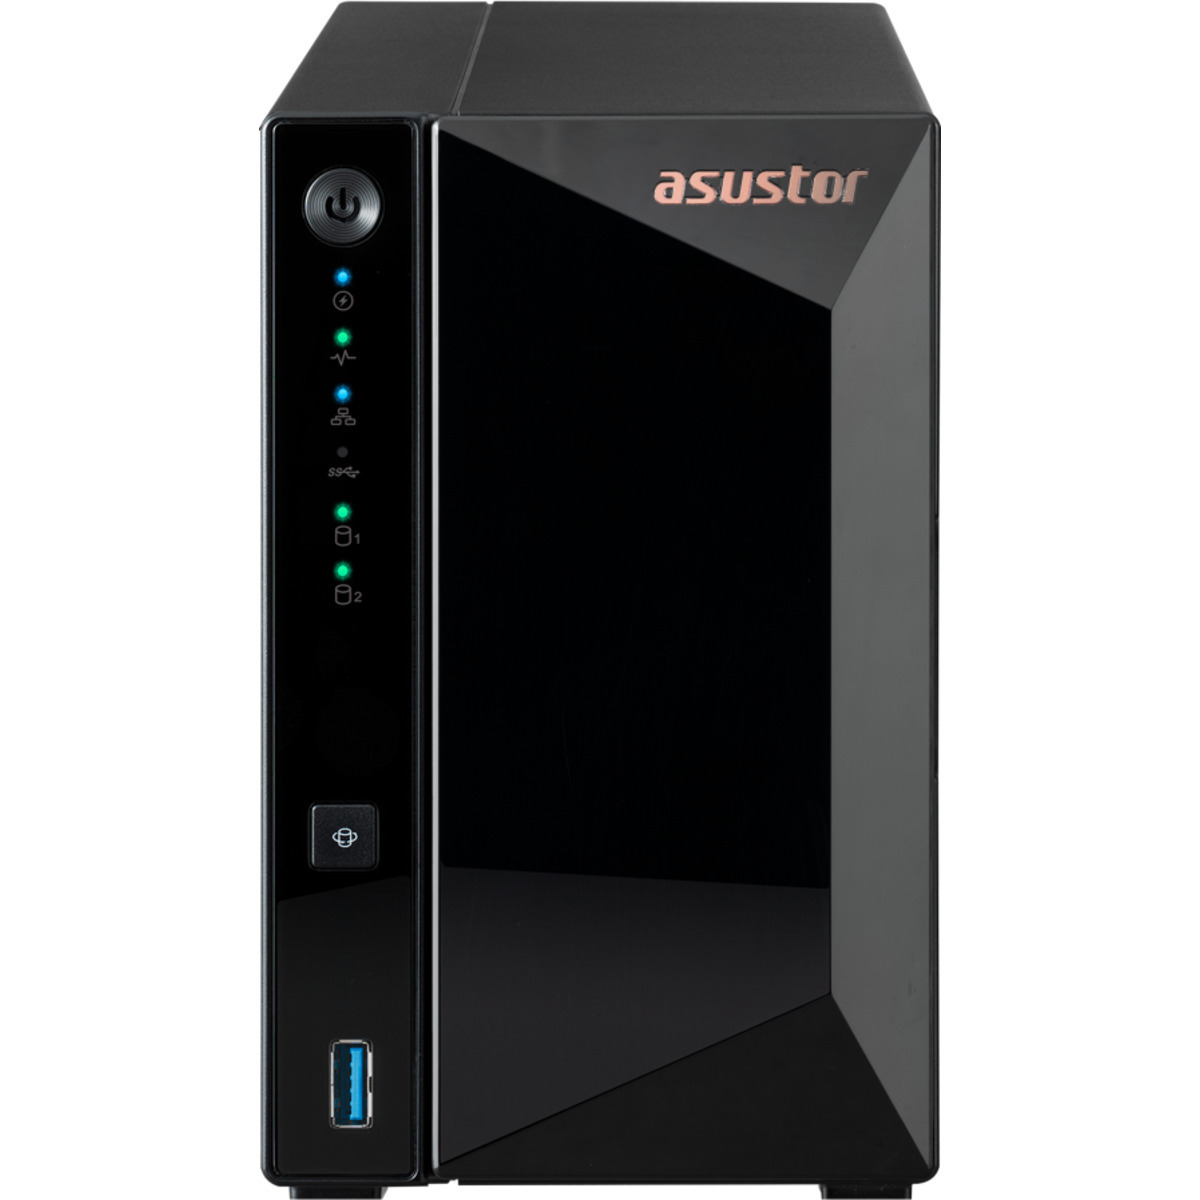 ASUSTOR DRIVESTOR 2 Pro AS3302T 16tb 2-Bay Desktop Personal / Basic Home / Small Office NAS - Network Attached Storage Device 2x8tb Western Digital Red Pro WD8003FFBX 3.5 7200rpm SATA 6Gb/s HDD NAS Class Drives Installed - Burn-In Tested DRIVESTOR 2 Pro AS3302T